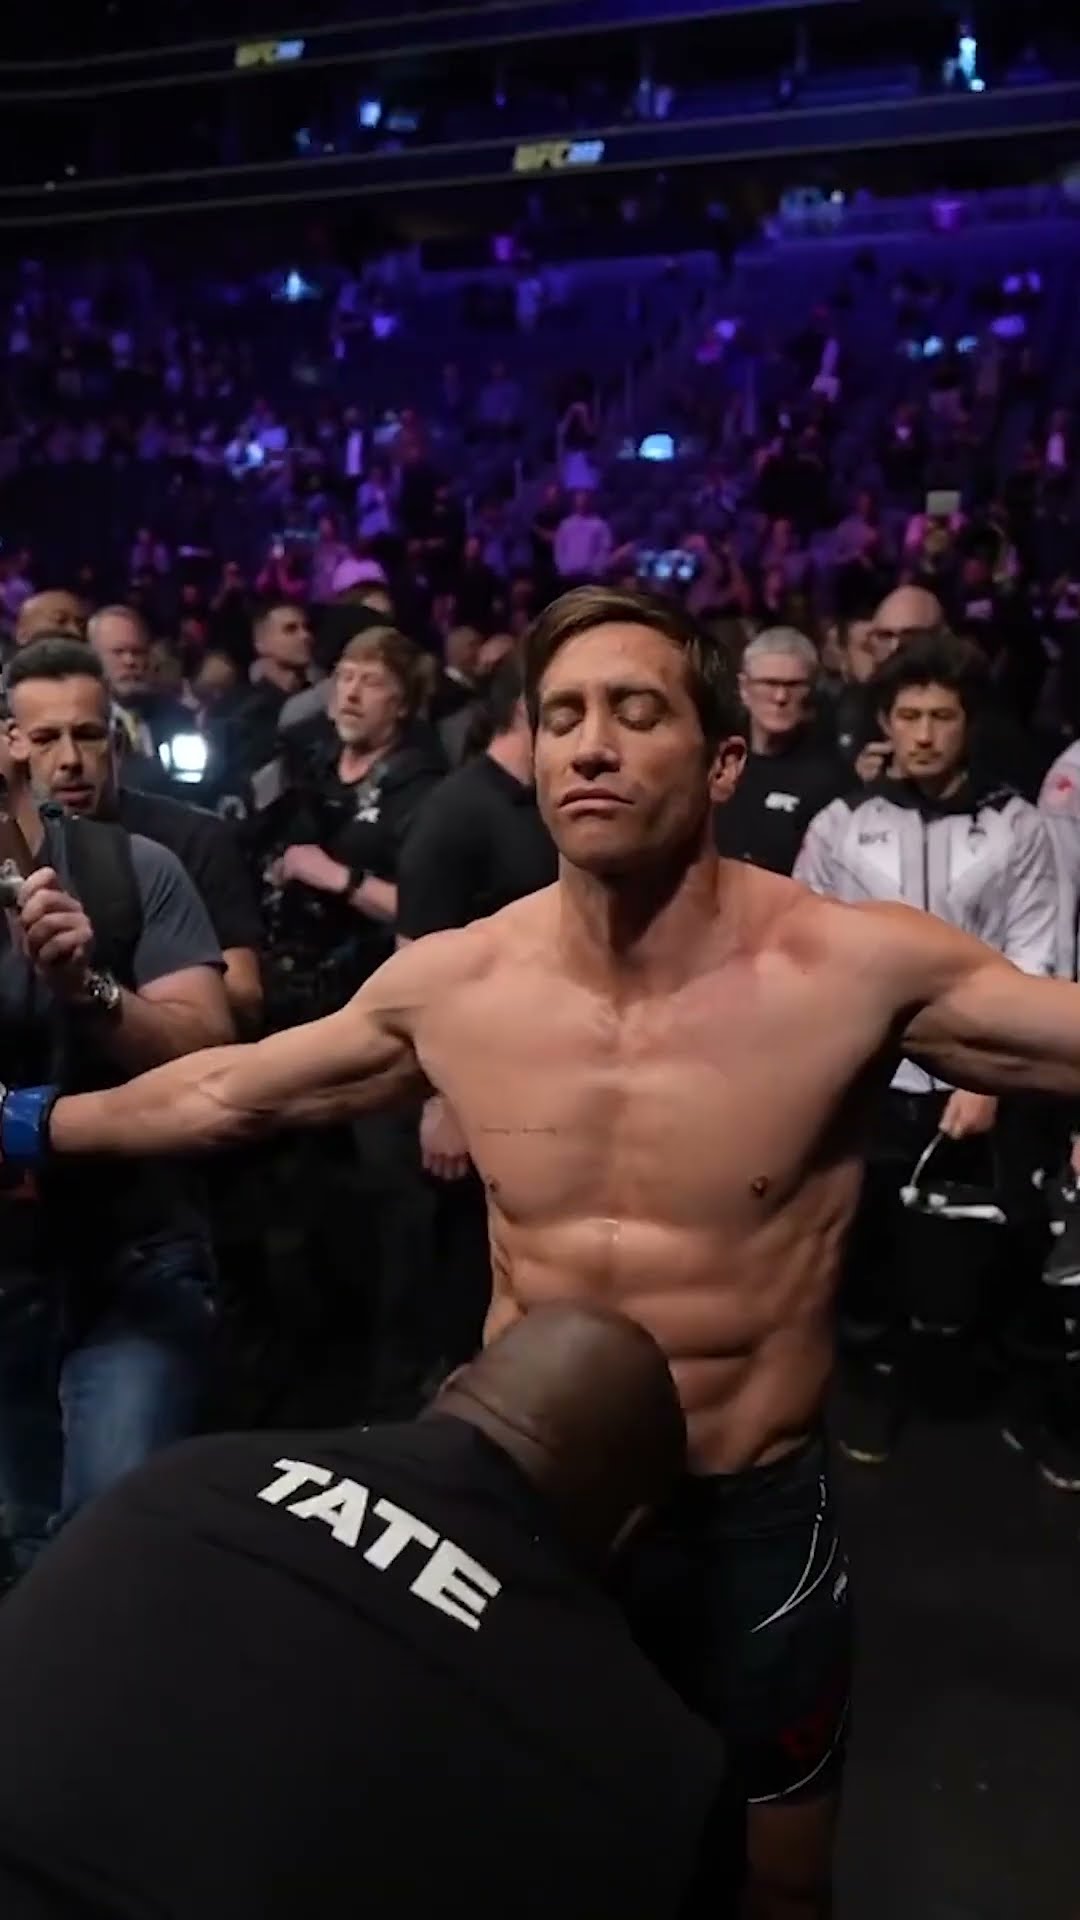 JAKE GYLLENHAAL SURPRİSES UFC CROWD AND FİGHTS FORMER UFC FİGHTER AFTER JON JONES FOR HİS NEW MOVİE